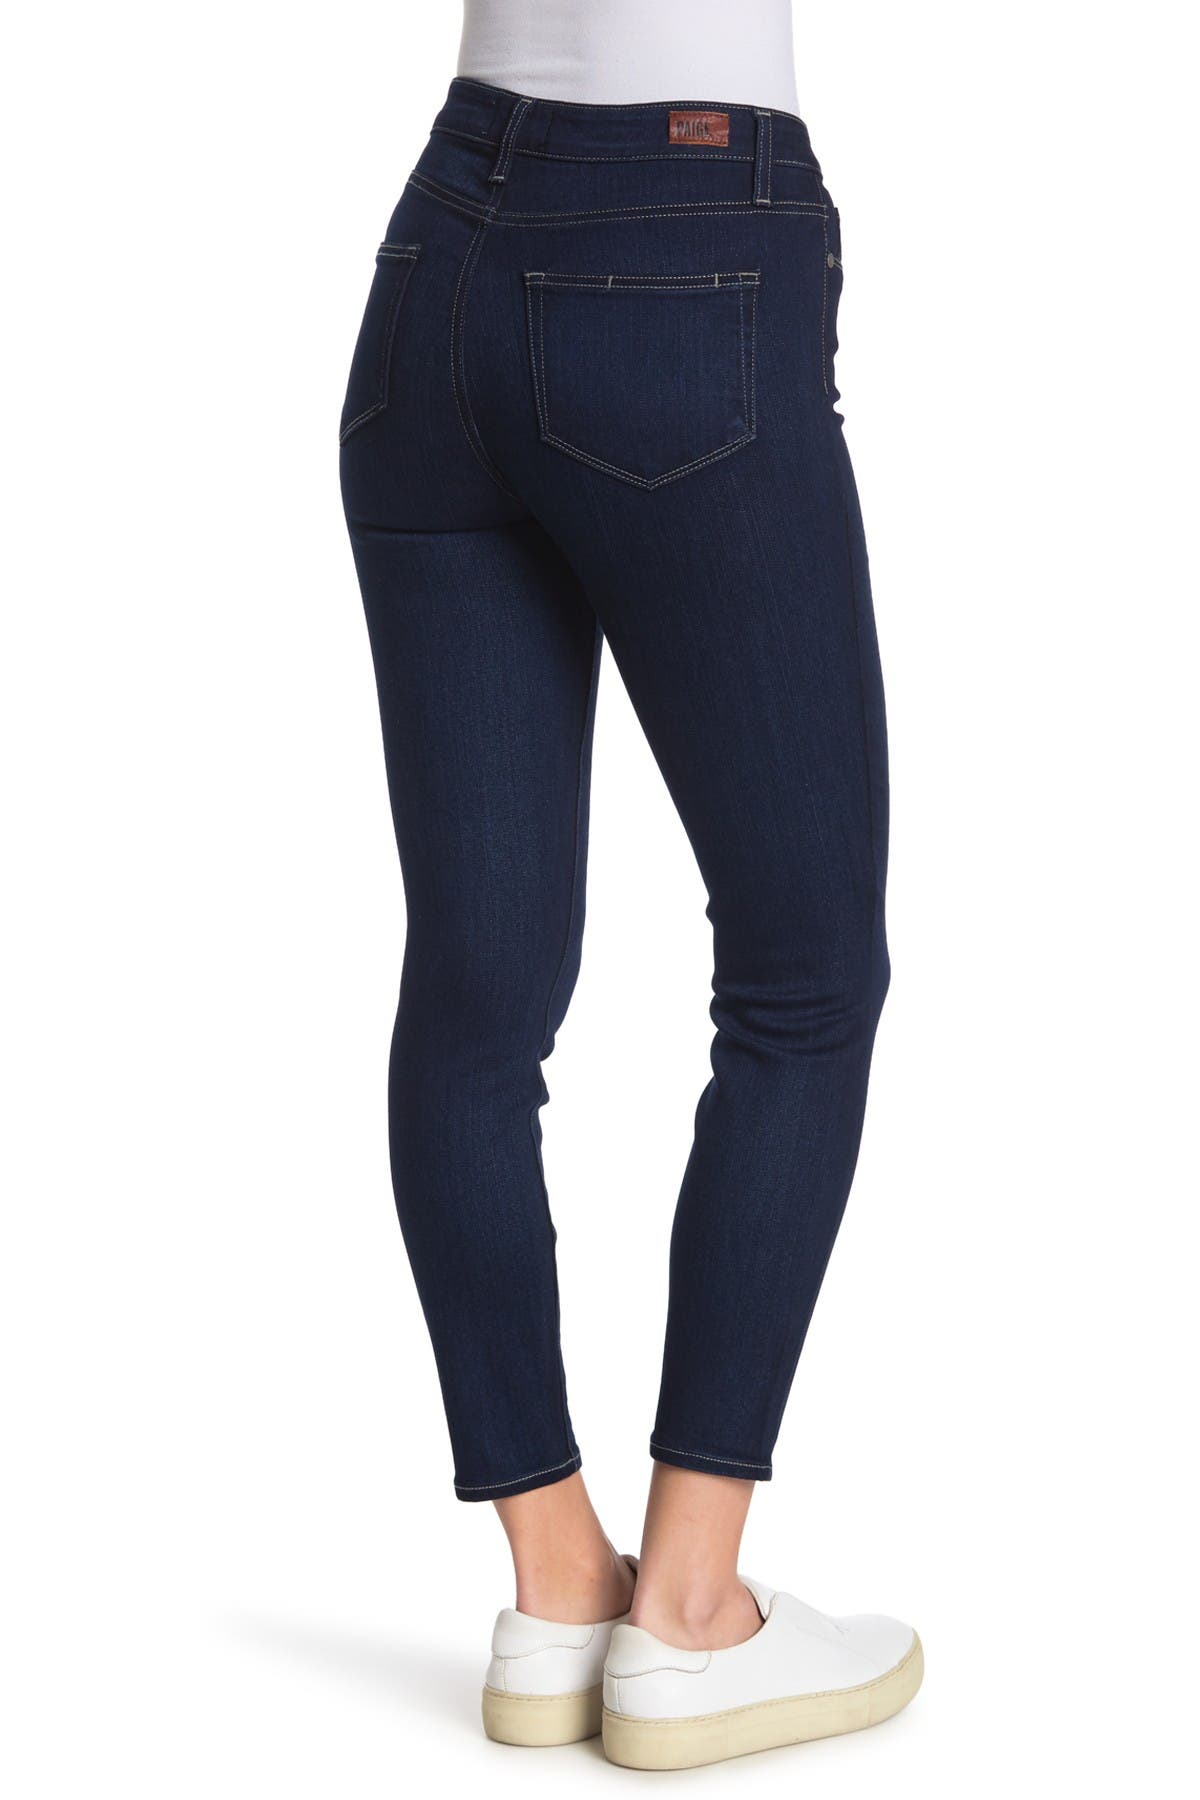 Paige Hoxton Crop Jeans In Blue